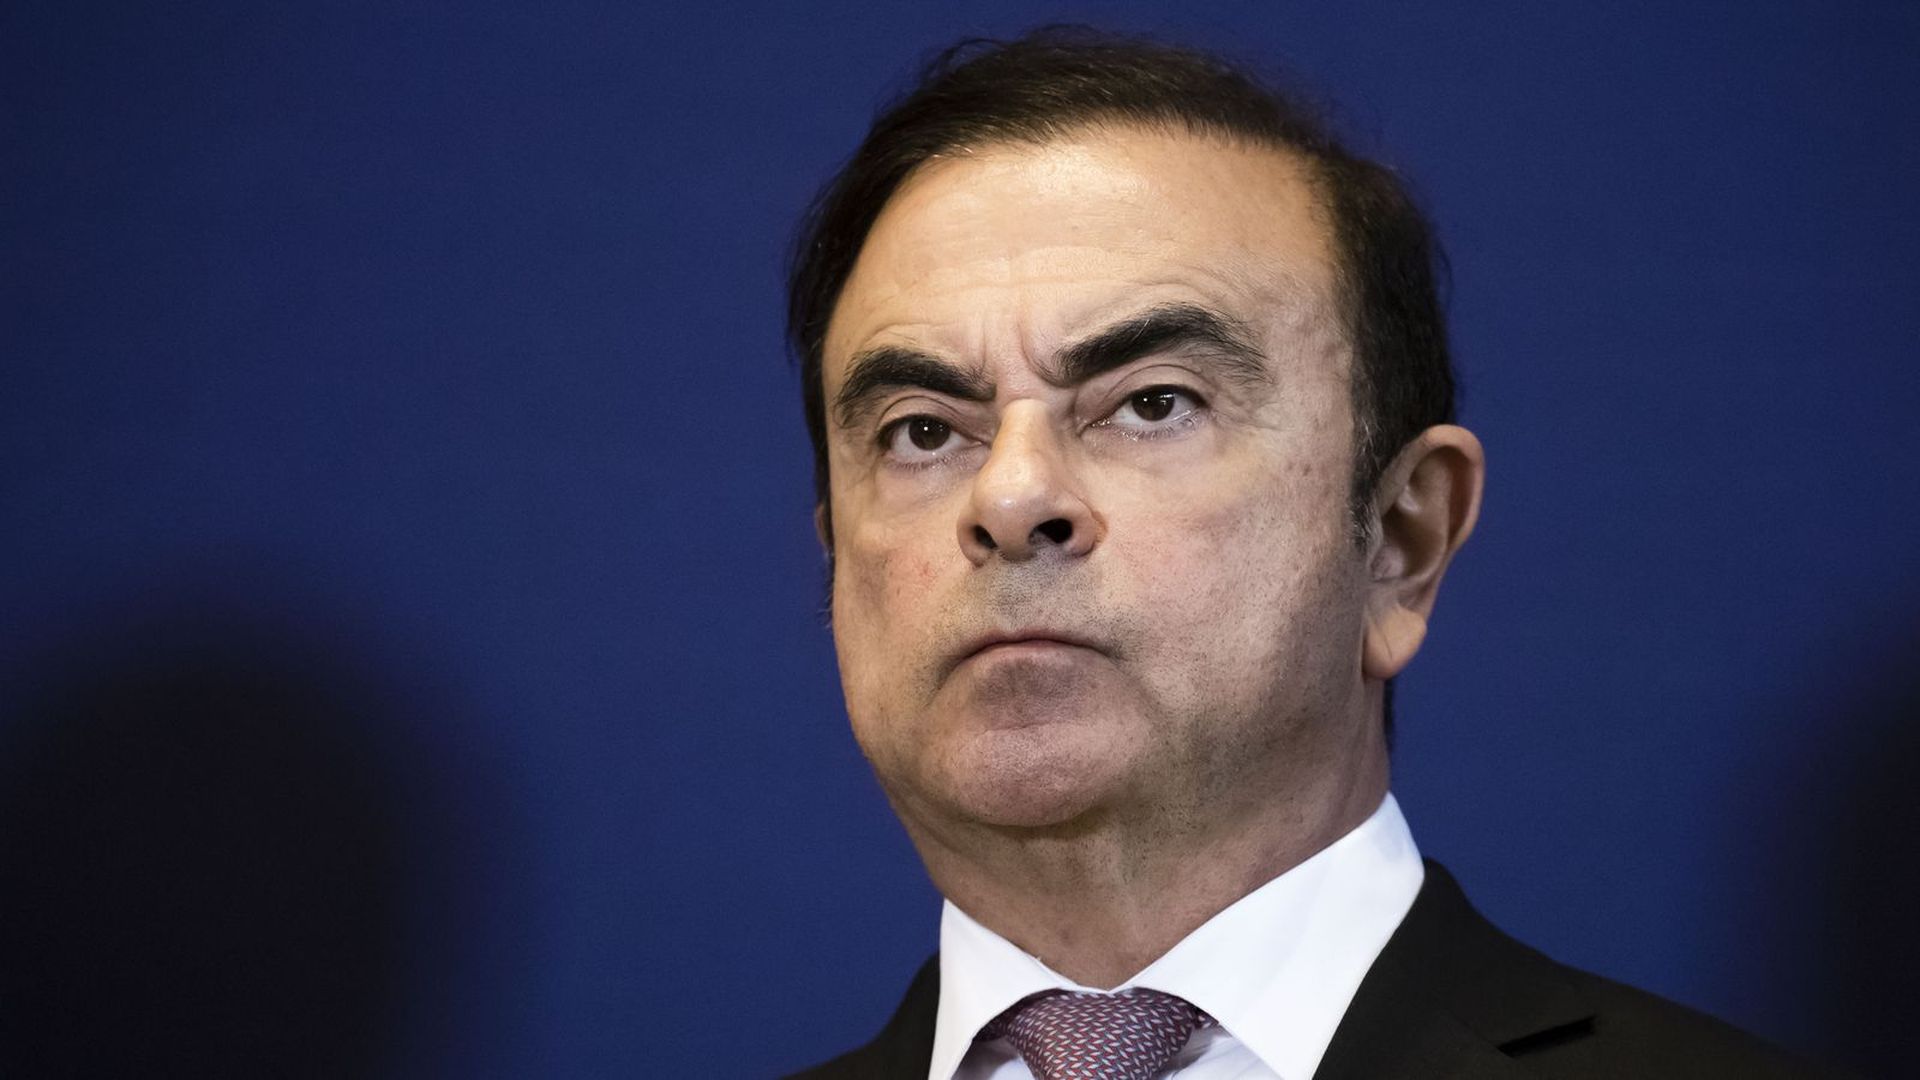 Nissan shareholders approved the ouster of chairman Carlos Ghosn.